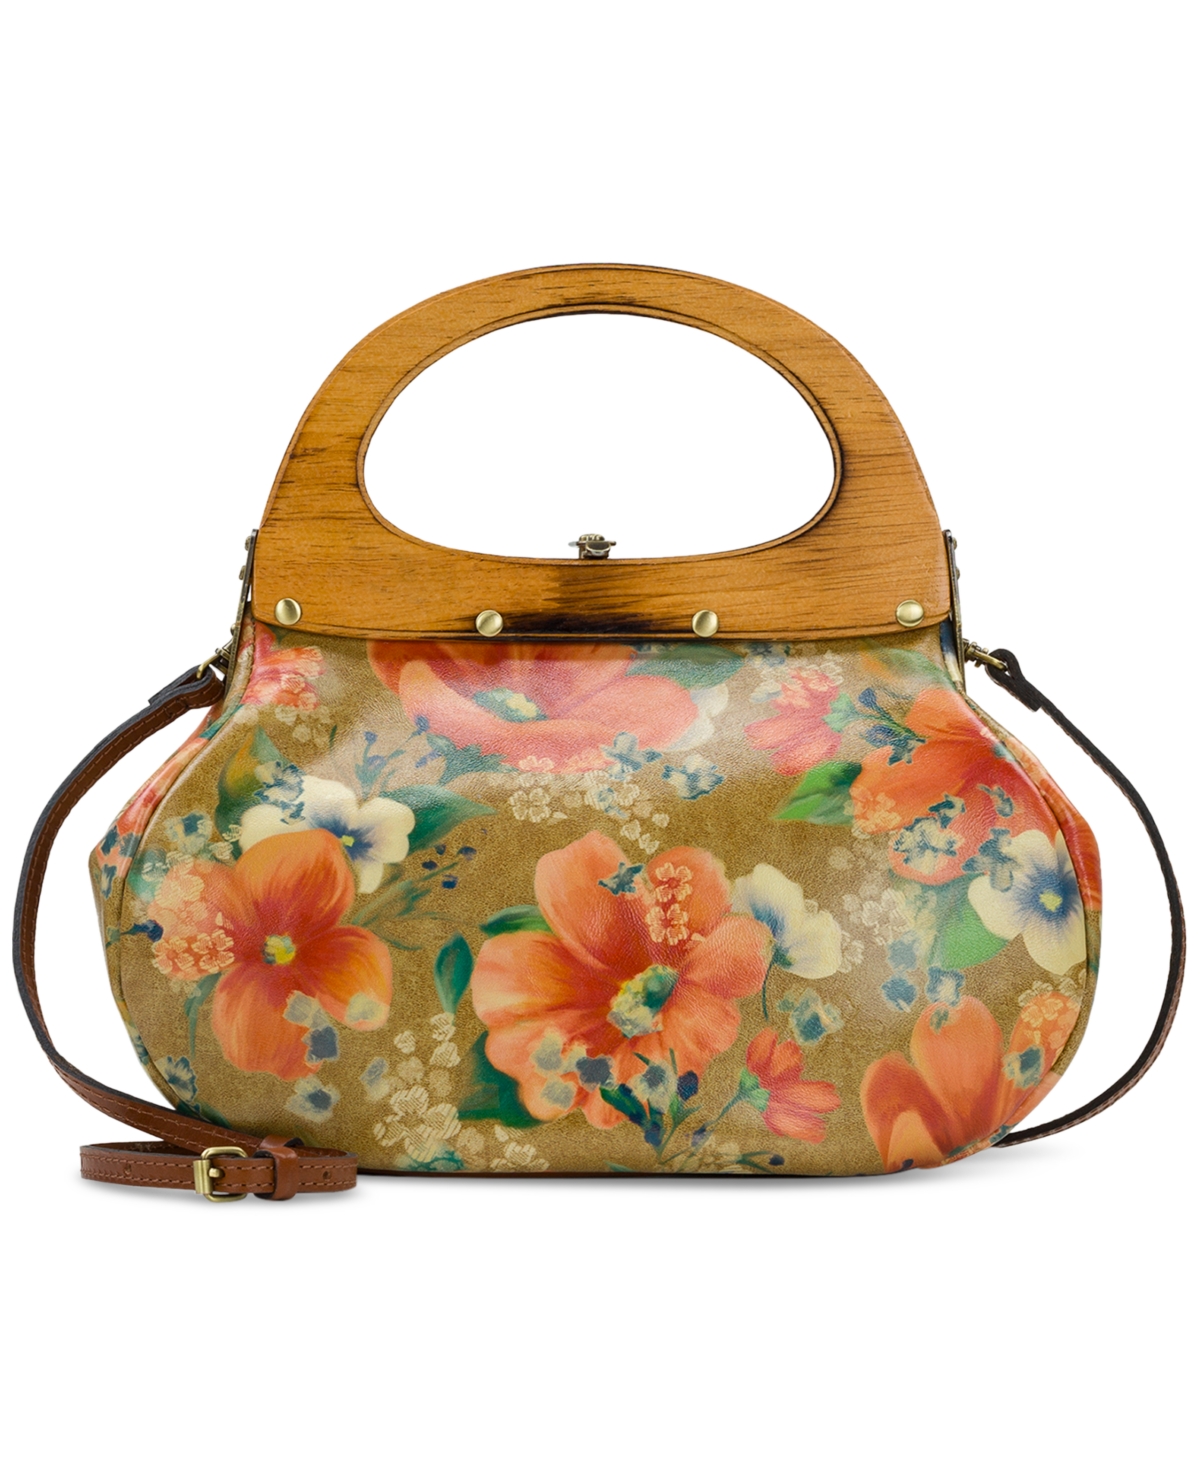 Patricia Nash Mirabella Small Leather Frame Bag In Apricot Blossoms